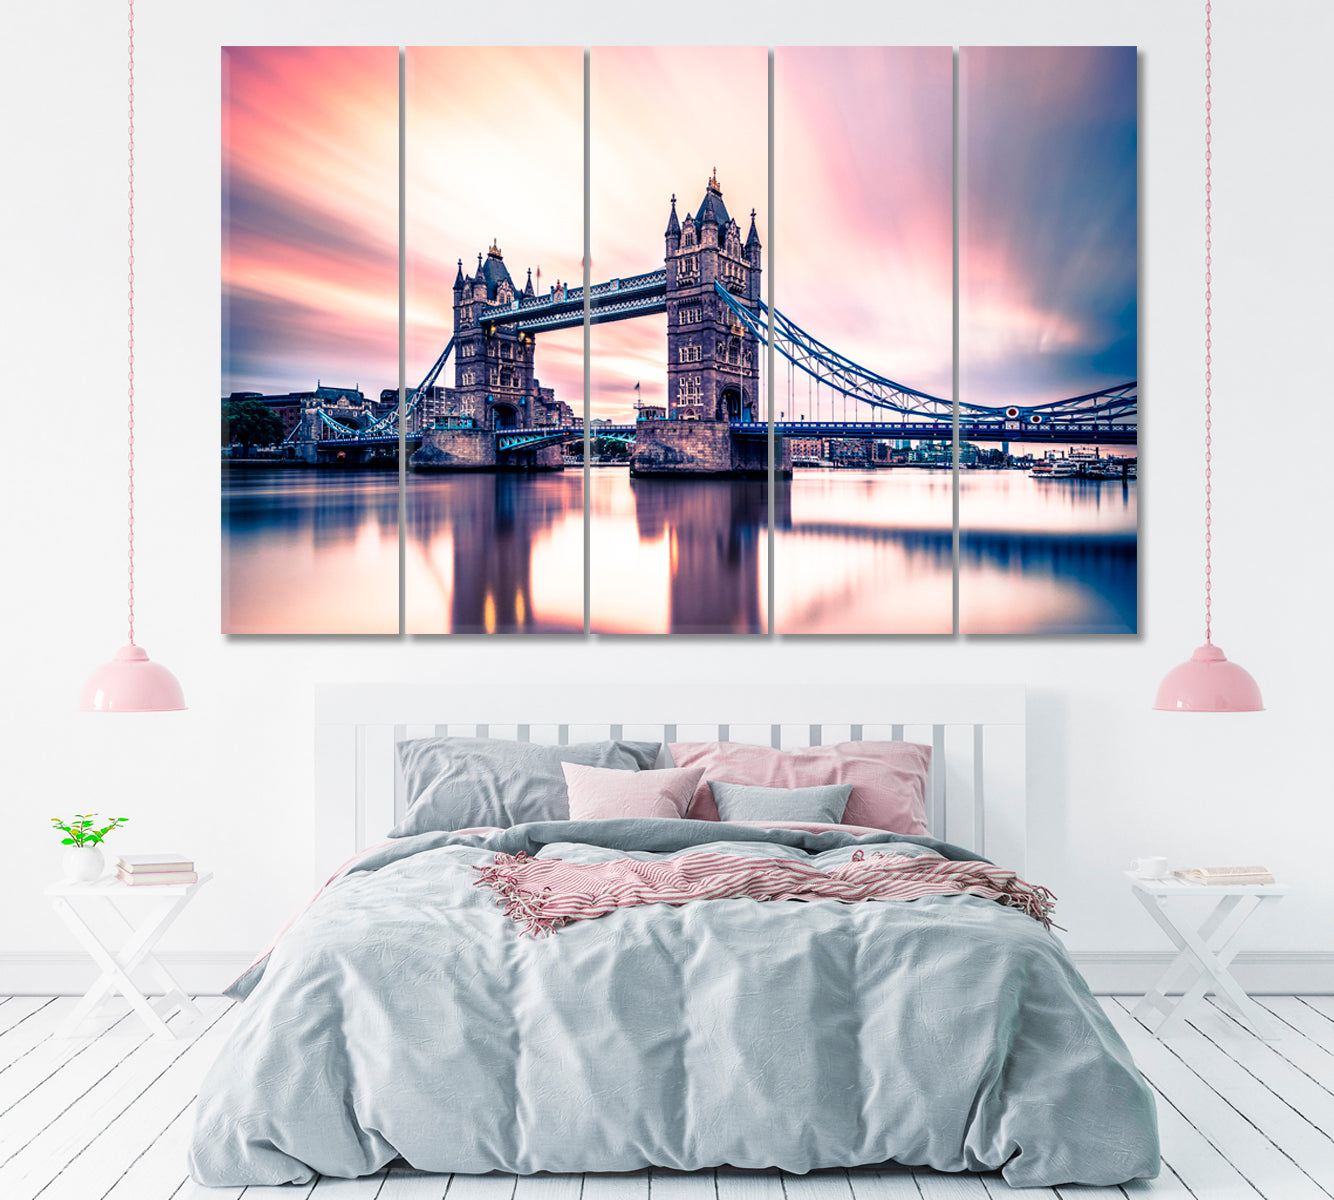 Thames River and London Tower Bridge Canvas Print ArtLexy 5 Panels 36"x24" inches 